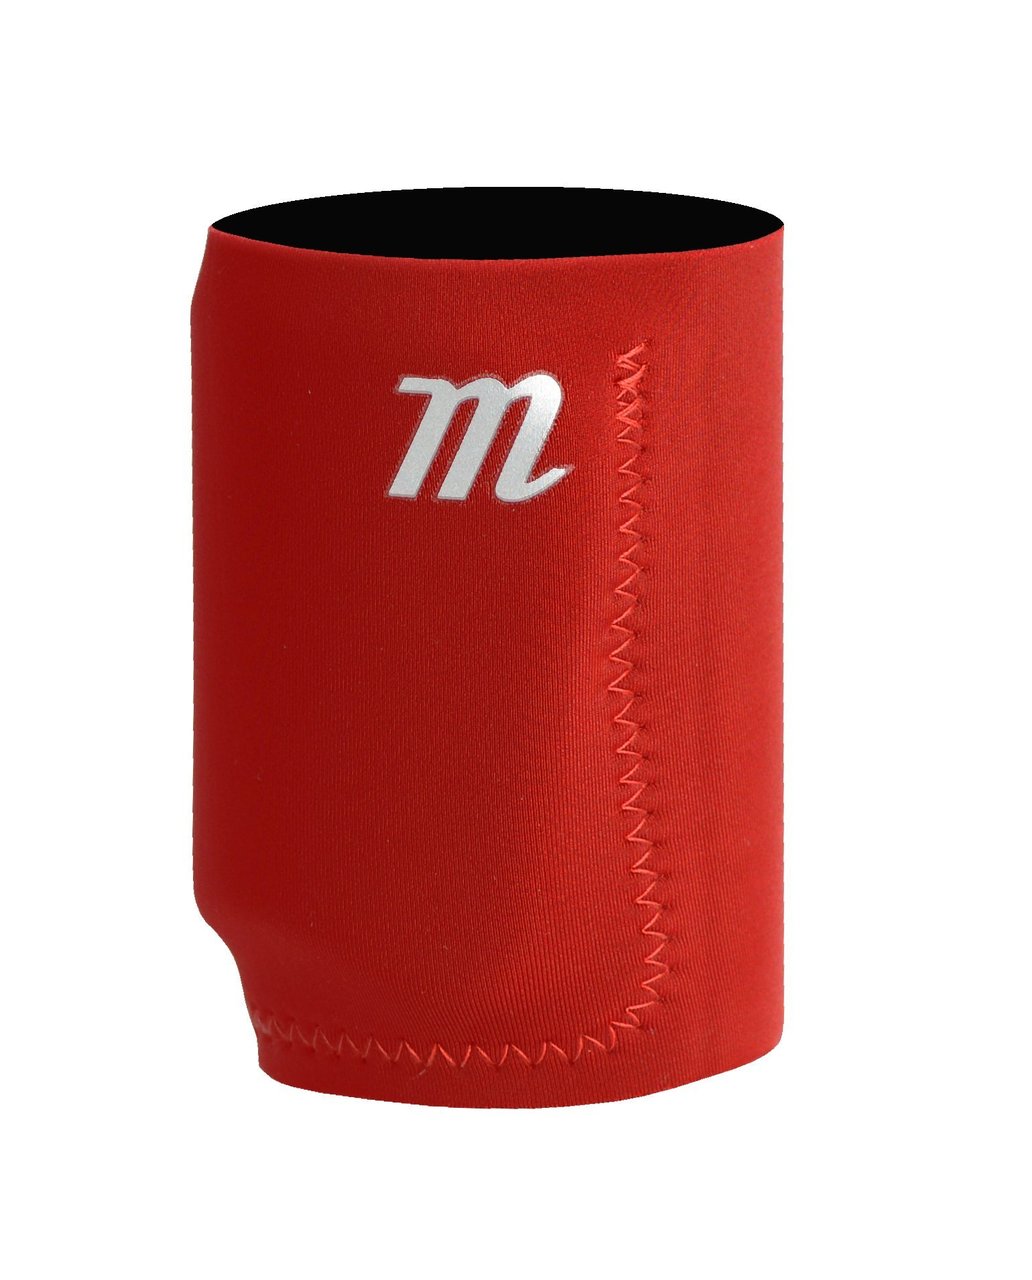 Marucci Adult Wrist Guard (Black, Medium) : Based in Baton Rouge, Louisiana, Marucci was founded by two former Major Leaguers and their athletic trainer - Kurt Ainsworth, Joe Lawrence and Jack Marucci  who began hand-crafting bats for some of the best players in the game from their garage. Fast forward 10 years and that dedication to quality and understanding of players' needs has turned into an All-American success story. Marucci is now the No. 1 bat in baseball with over 350 Big League players swinging their wood. In stark contrast to other companies who pay players, Marucci has star players like Albert Pujols, Chase Utley, David Ortiz, Jose Bautista and Andrew McCutchen invest their hard-earned money and time by advising us on designs and testing our products.